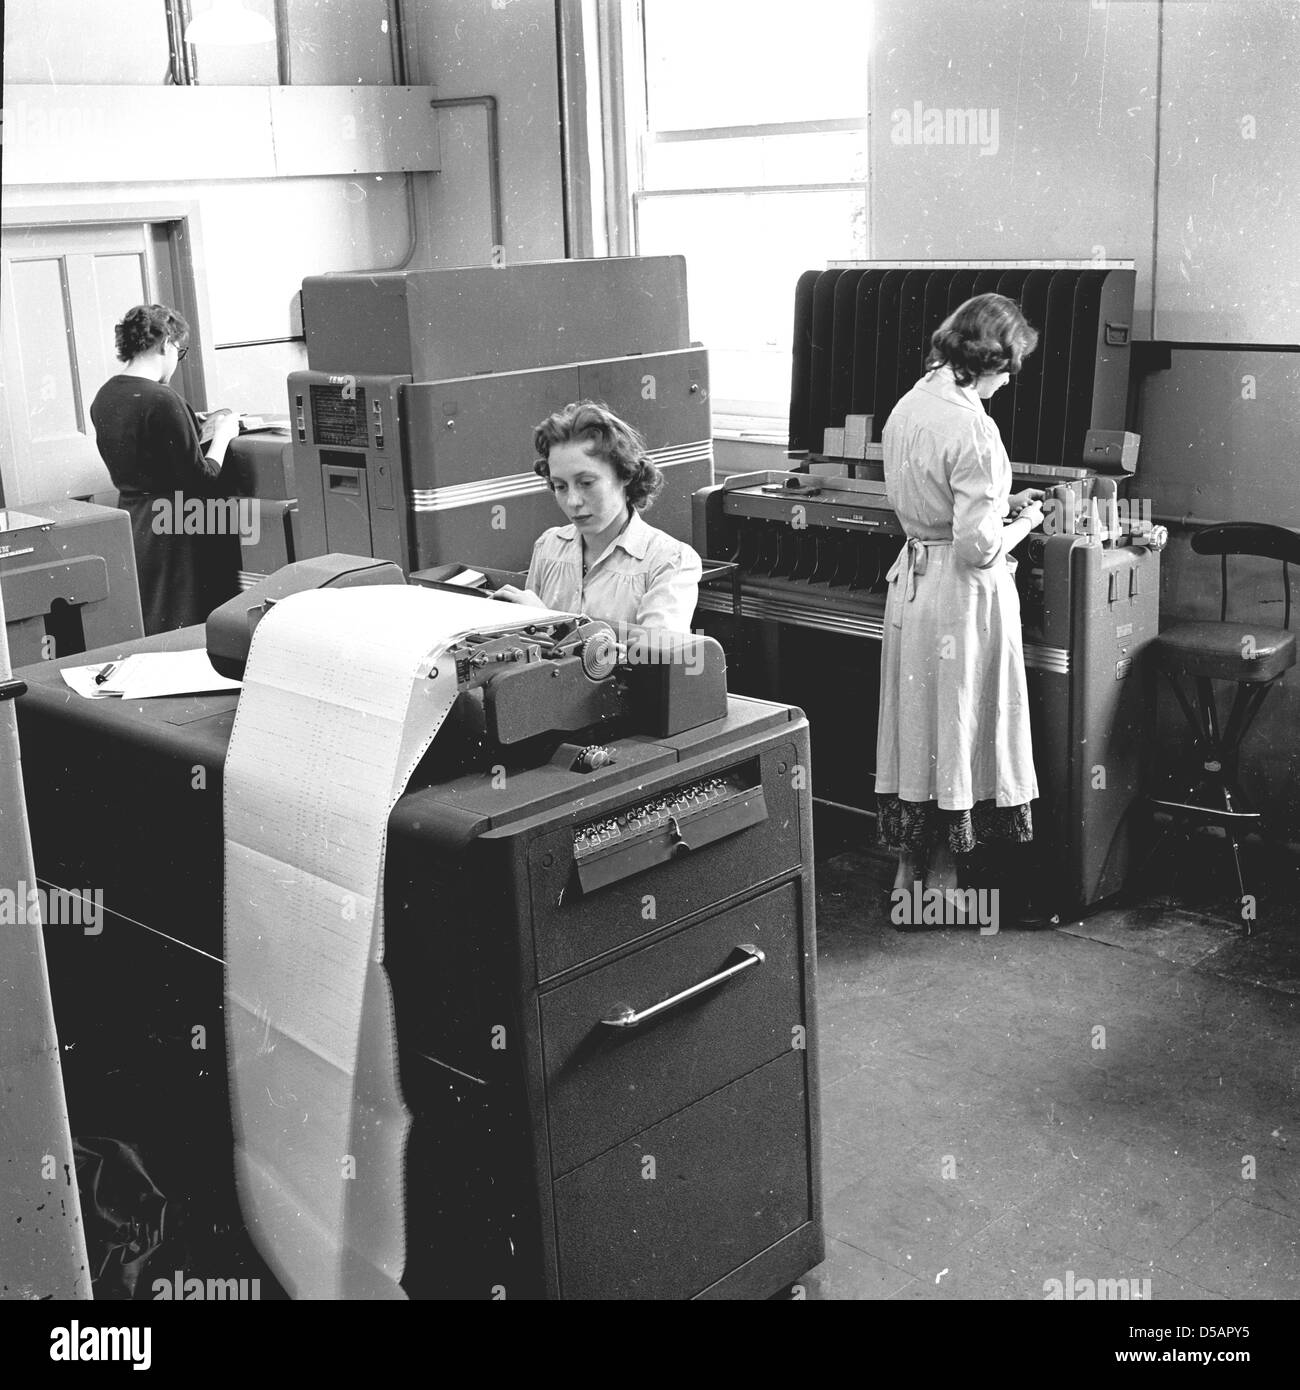 Historical picture from the late 1950s of three young women working in a company office using the large and cumbersome data processing machines and electronic printers of the era. One lady is working at a tabulator, an early data processing machine, used for processing data held on punched cards, while another lady is at what was referred to as a collator, a machine that sorted the punched cards. These machines were the forerunners of the early computers. Stock Photo